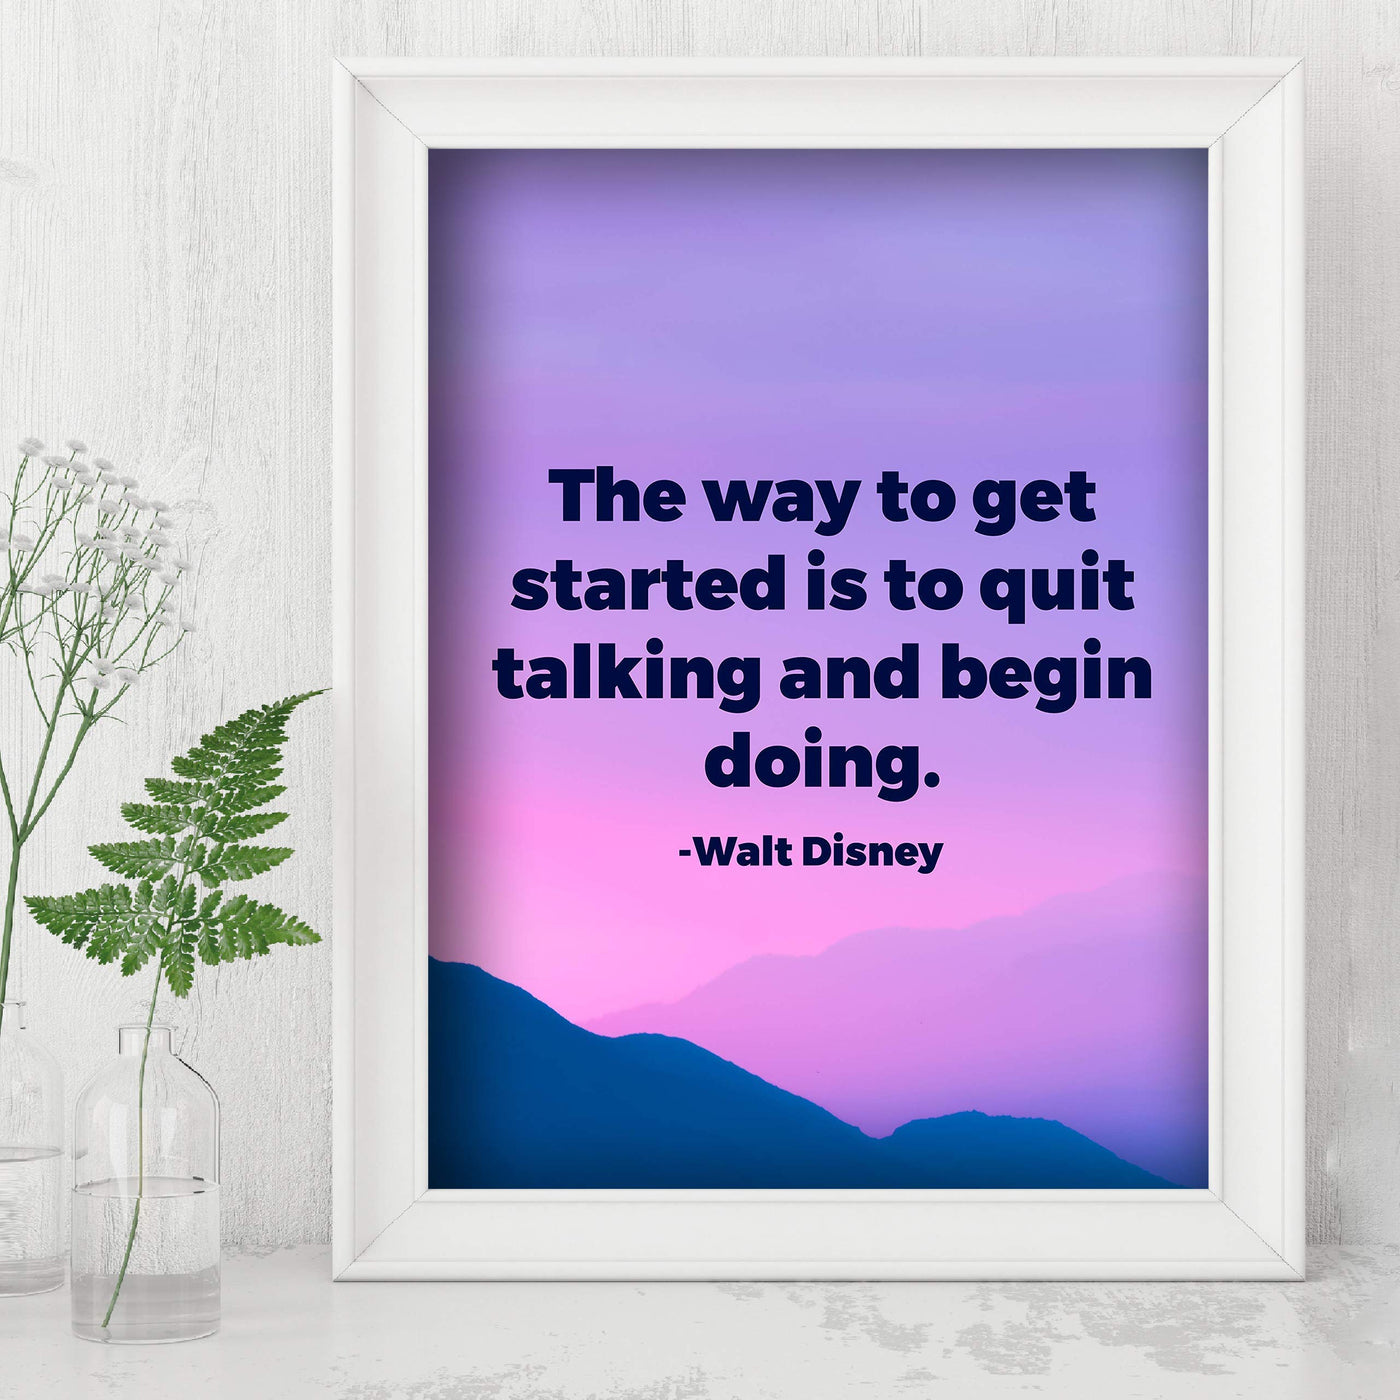 Walt Disney Quotes-"Way to Get Started By Quit Talking-Begin Doing"-Motivational Wall Art -8x10" Typographic Mouintain Landscape Print-Ready to Frame. Inspirational Home-Office-Classroom-Work Decor!